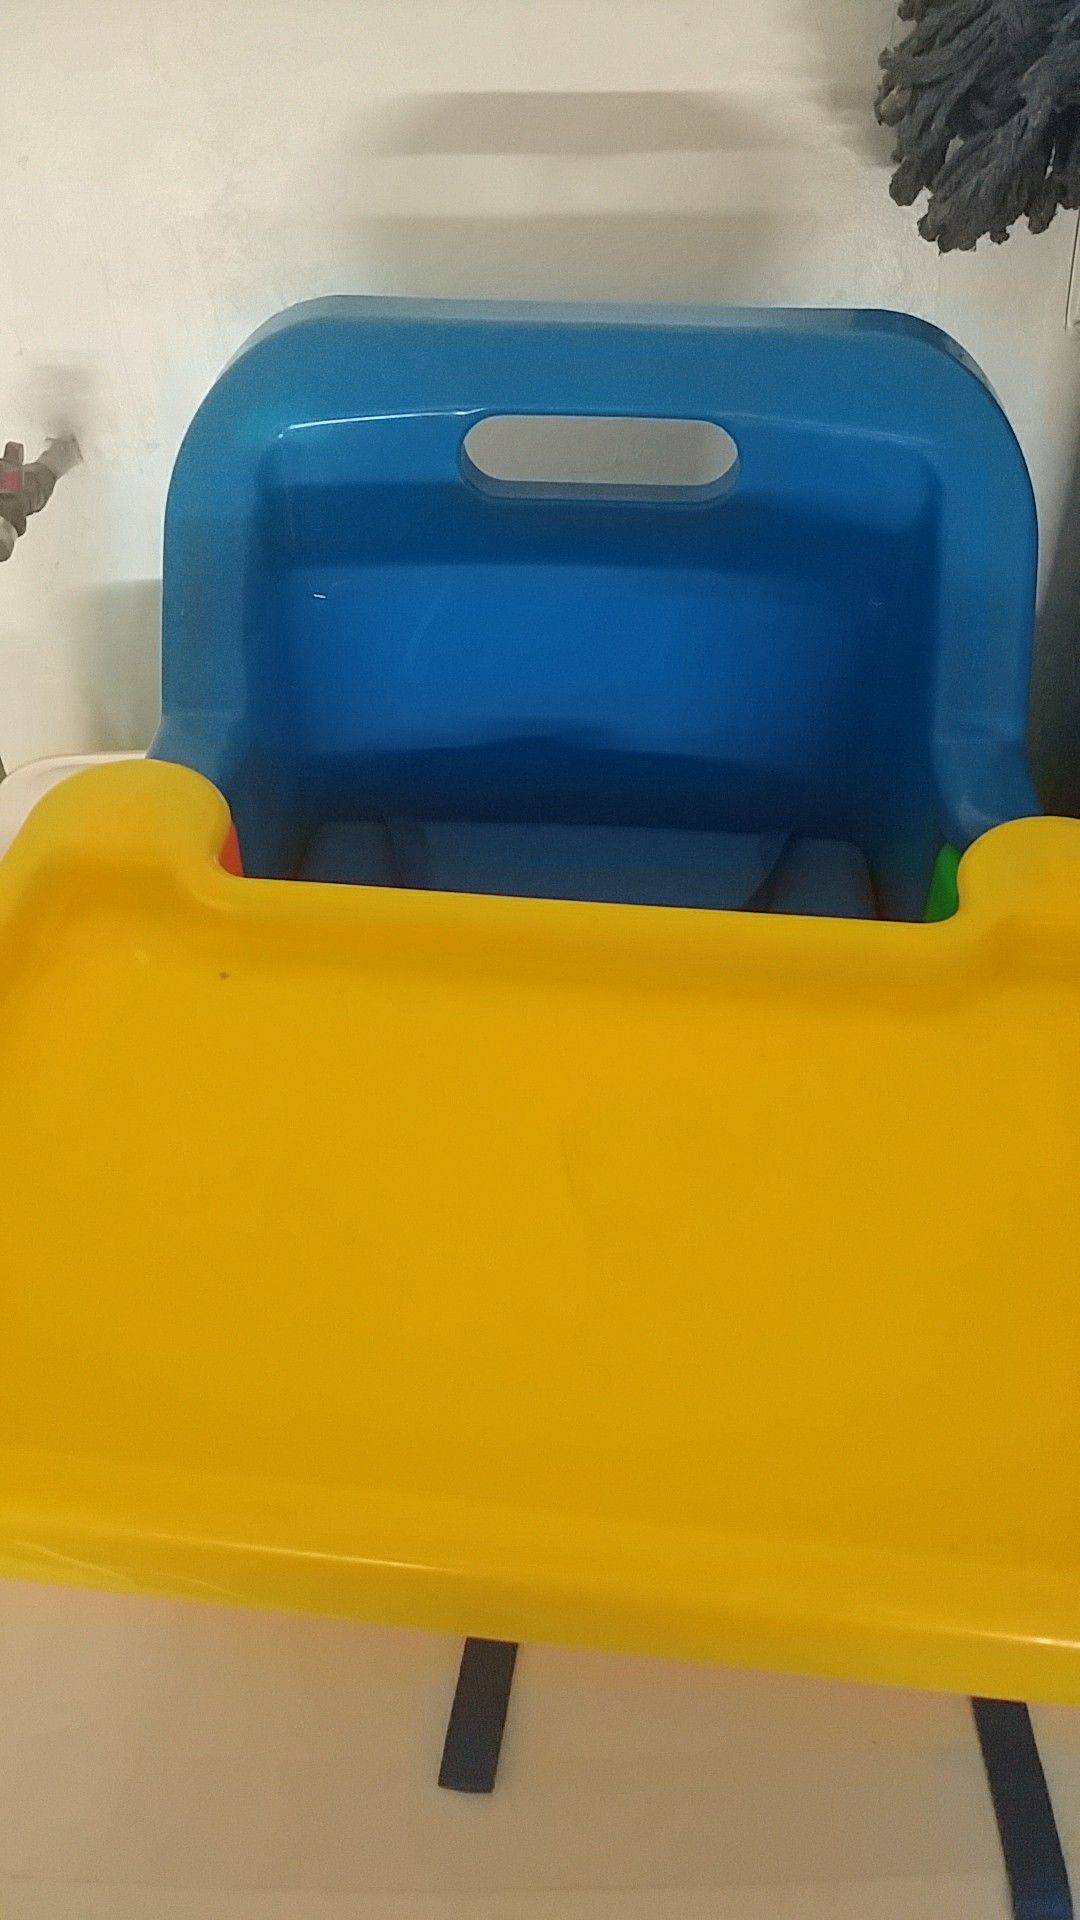 Booster dinner seat